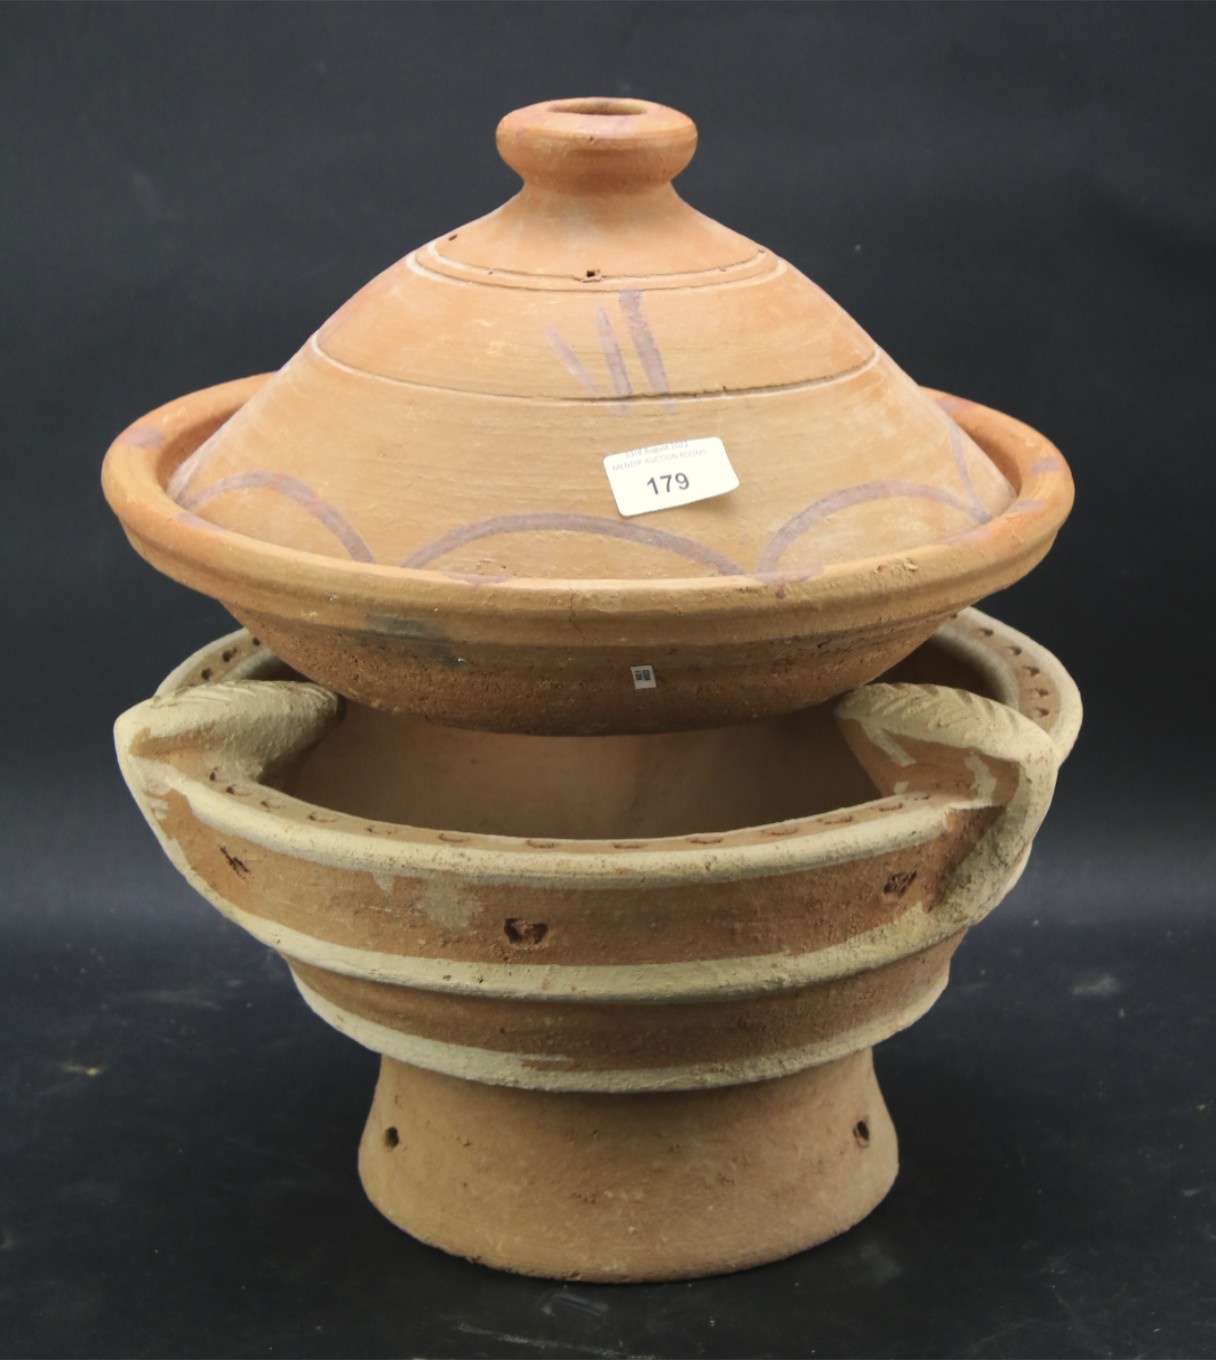 A terracotta dish and tureen.